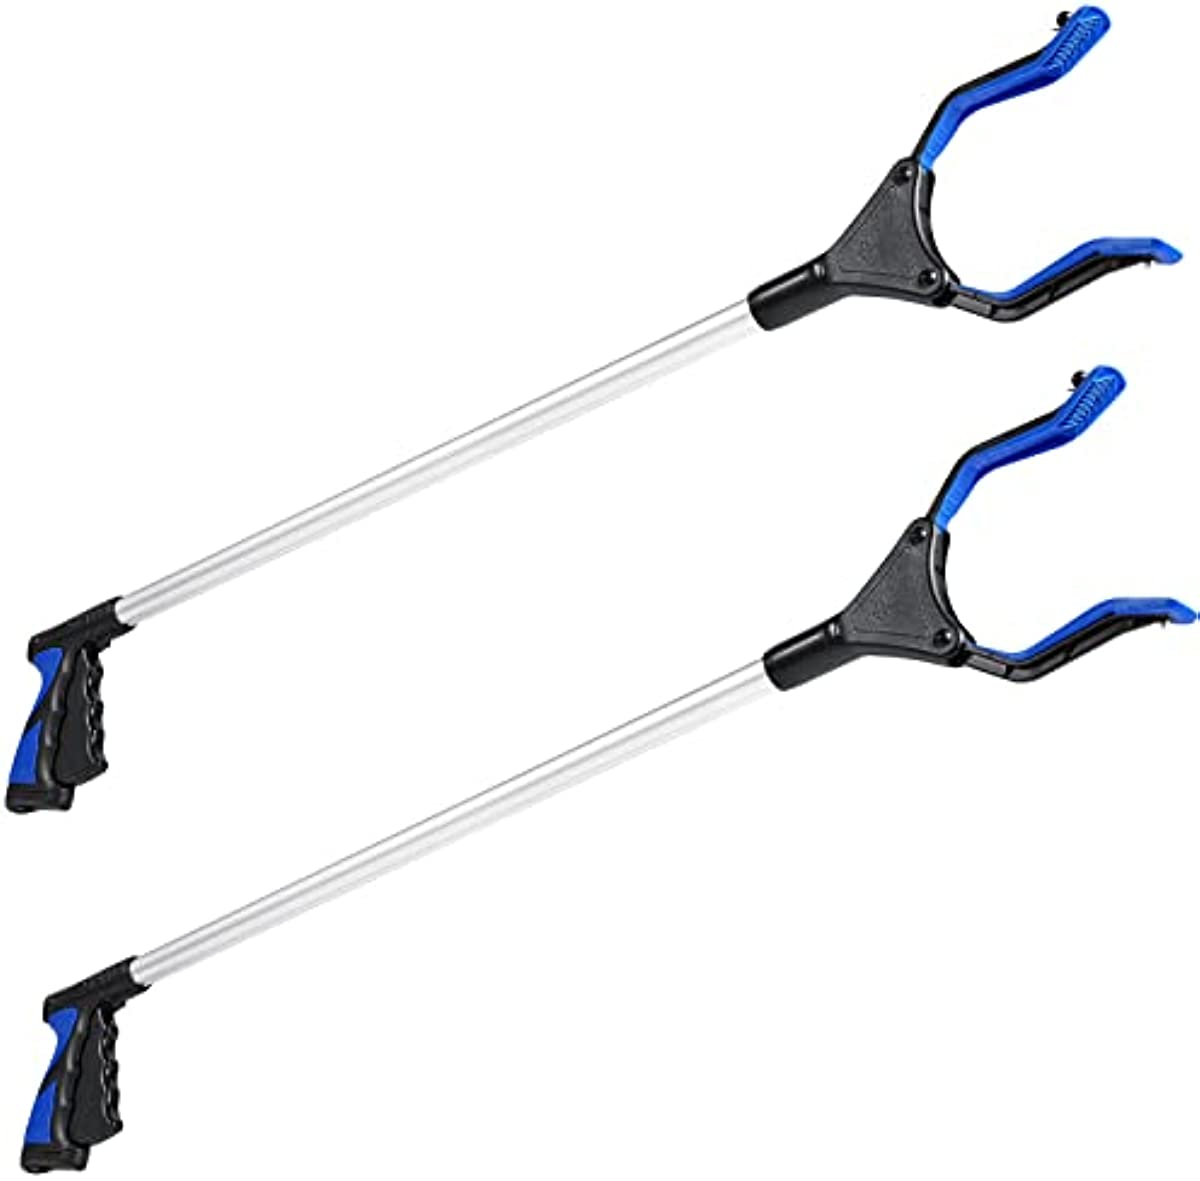 Rirether 2-Pack 32 Inch Grabber Tool for Elderly, Non-Foldable Aluminum Alloy Reacher Grabber with Magnetic Tip and Hook, Rotating Gripper, Wide Jaw Reaching Aid (32 Inch, Blue)